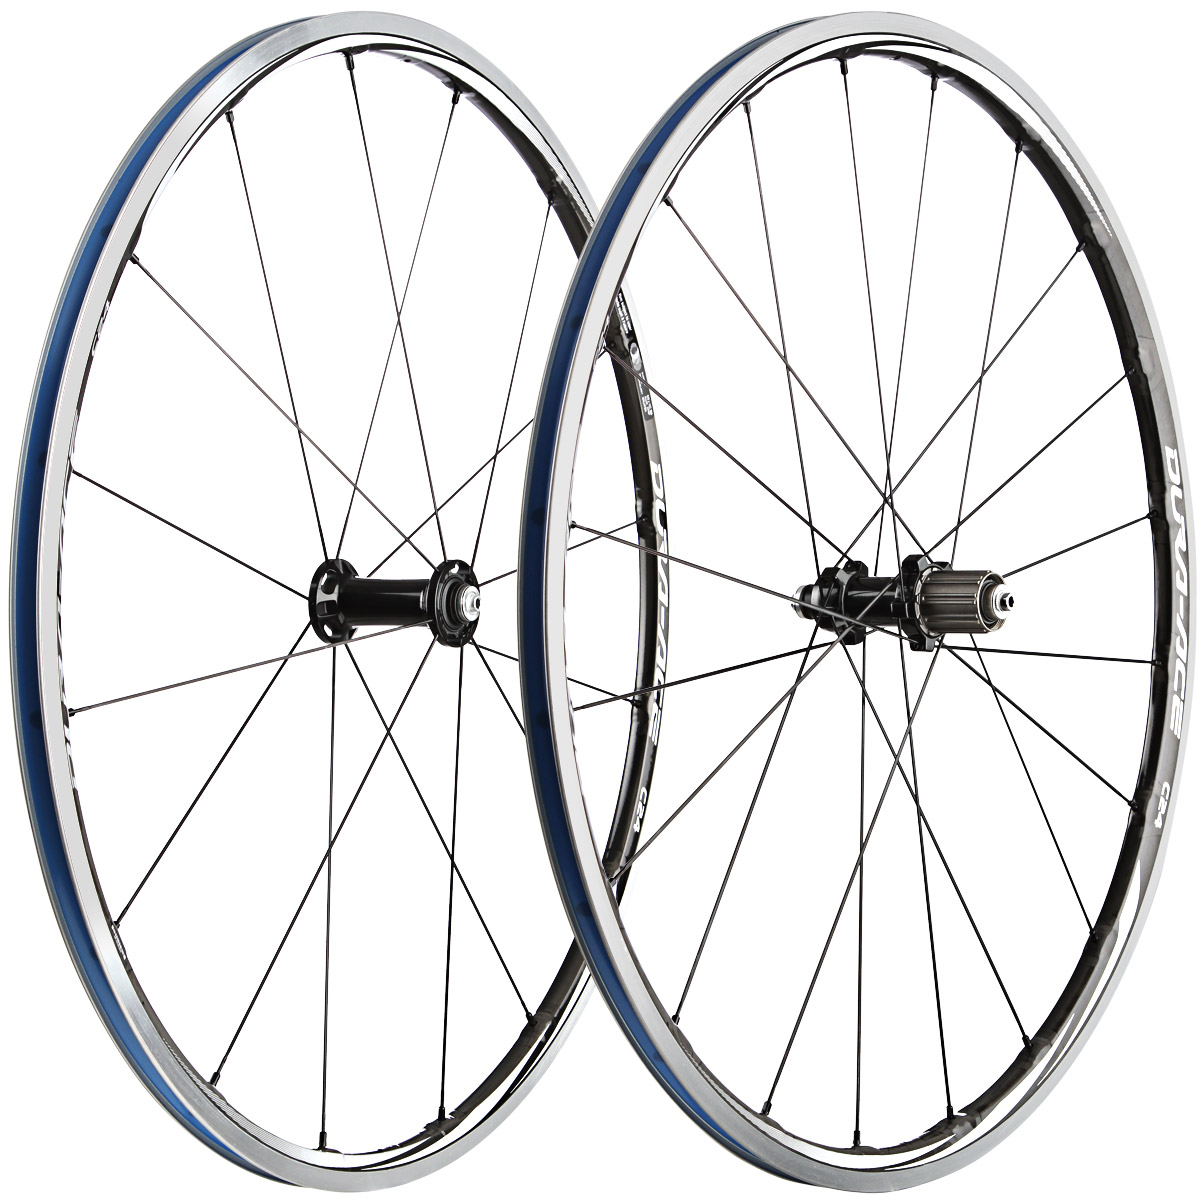 Rider's Cafe: Review: Dura Ace 9000 Wheelset